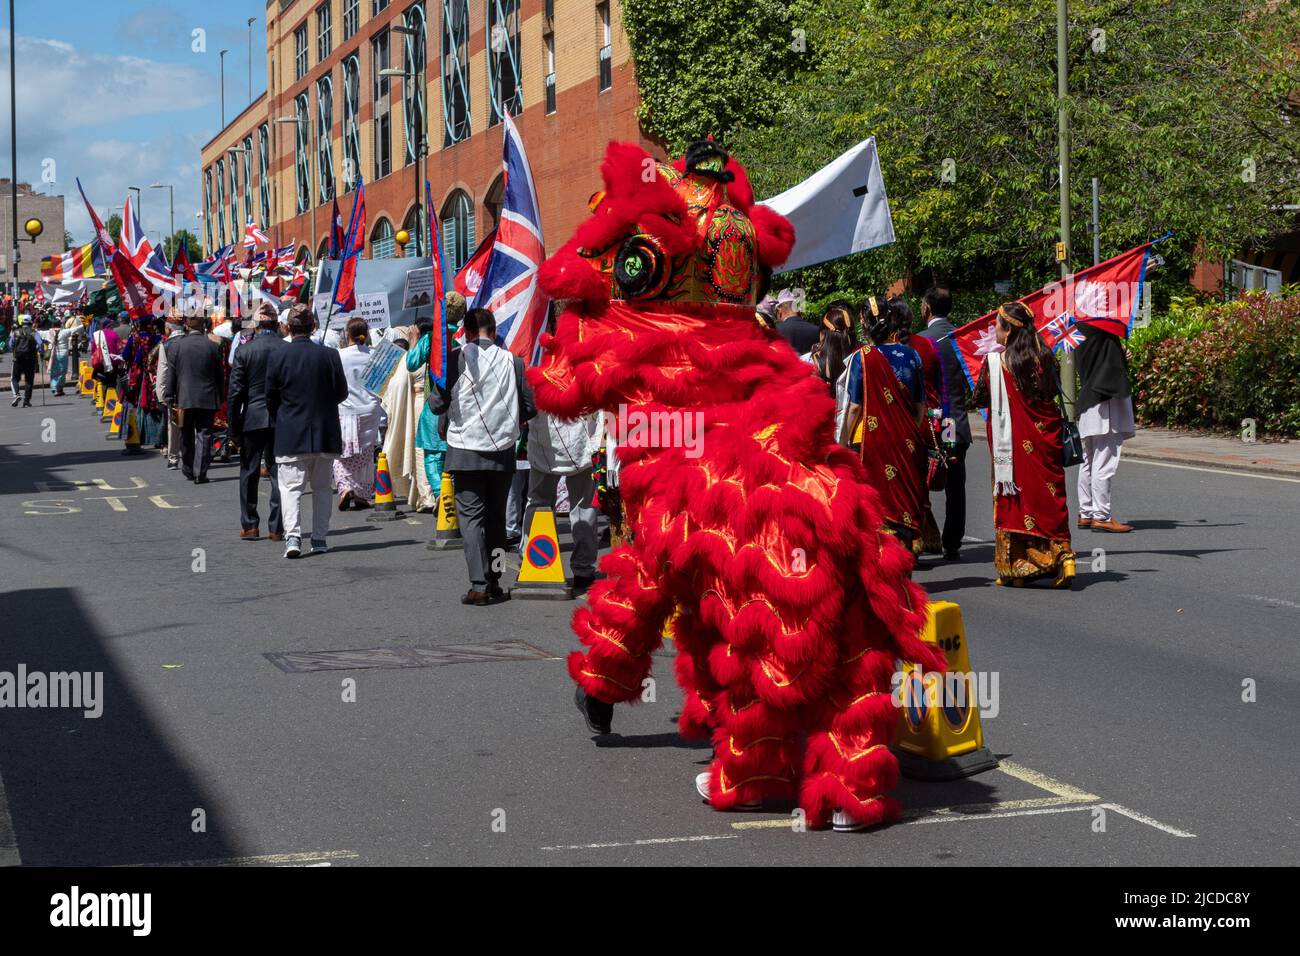 The Grand Parade at Victoria Day, an annual event in Aldershot, Hampshire, England, UK, with a Chinese Lion Dancer taking part Stock Photo